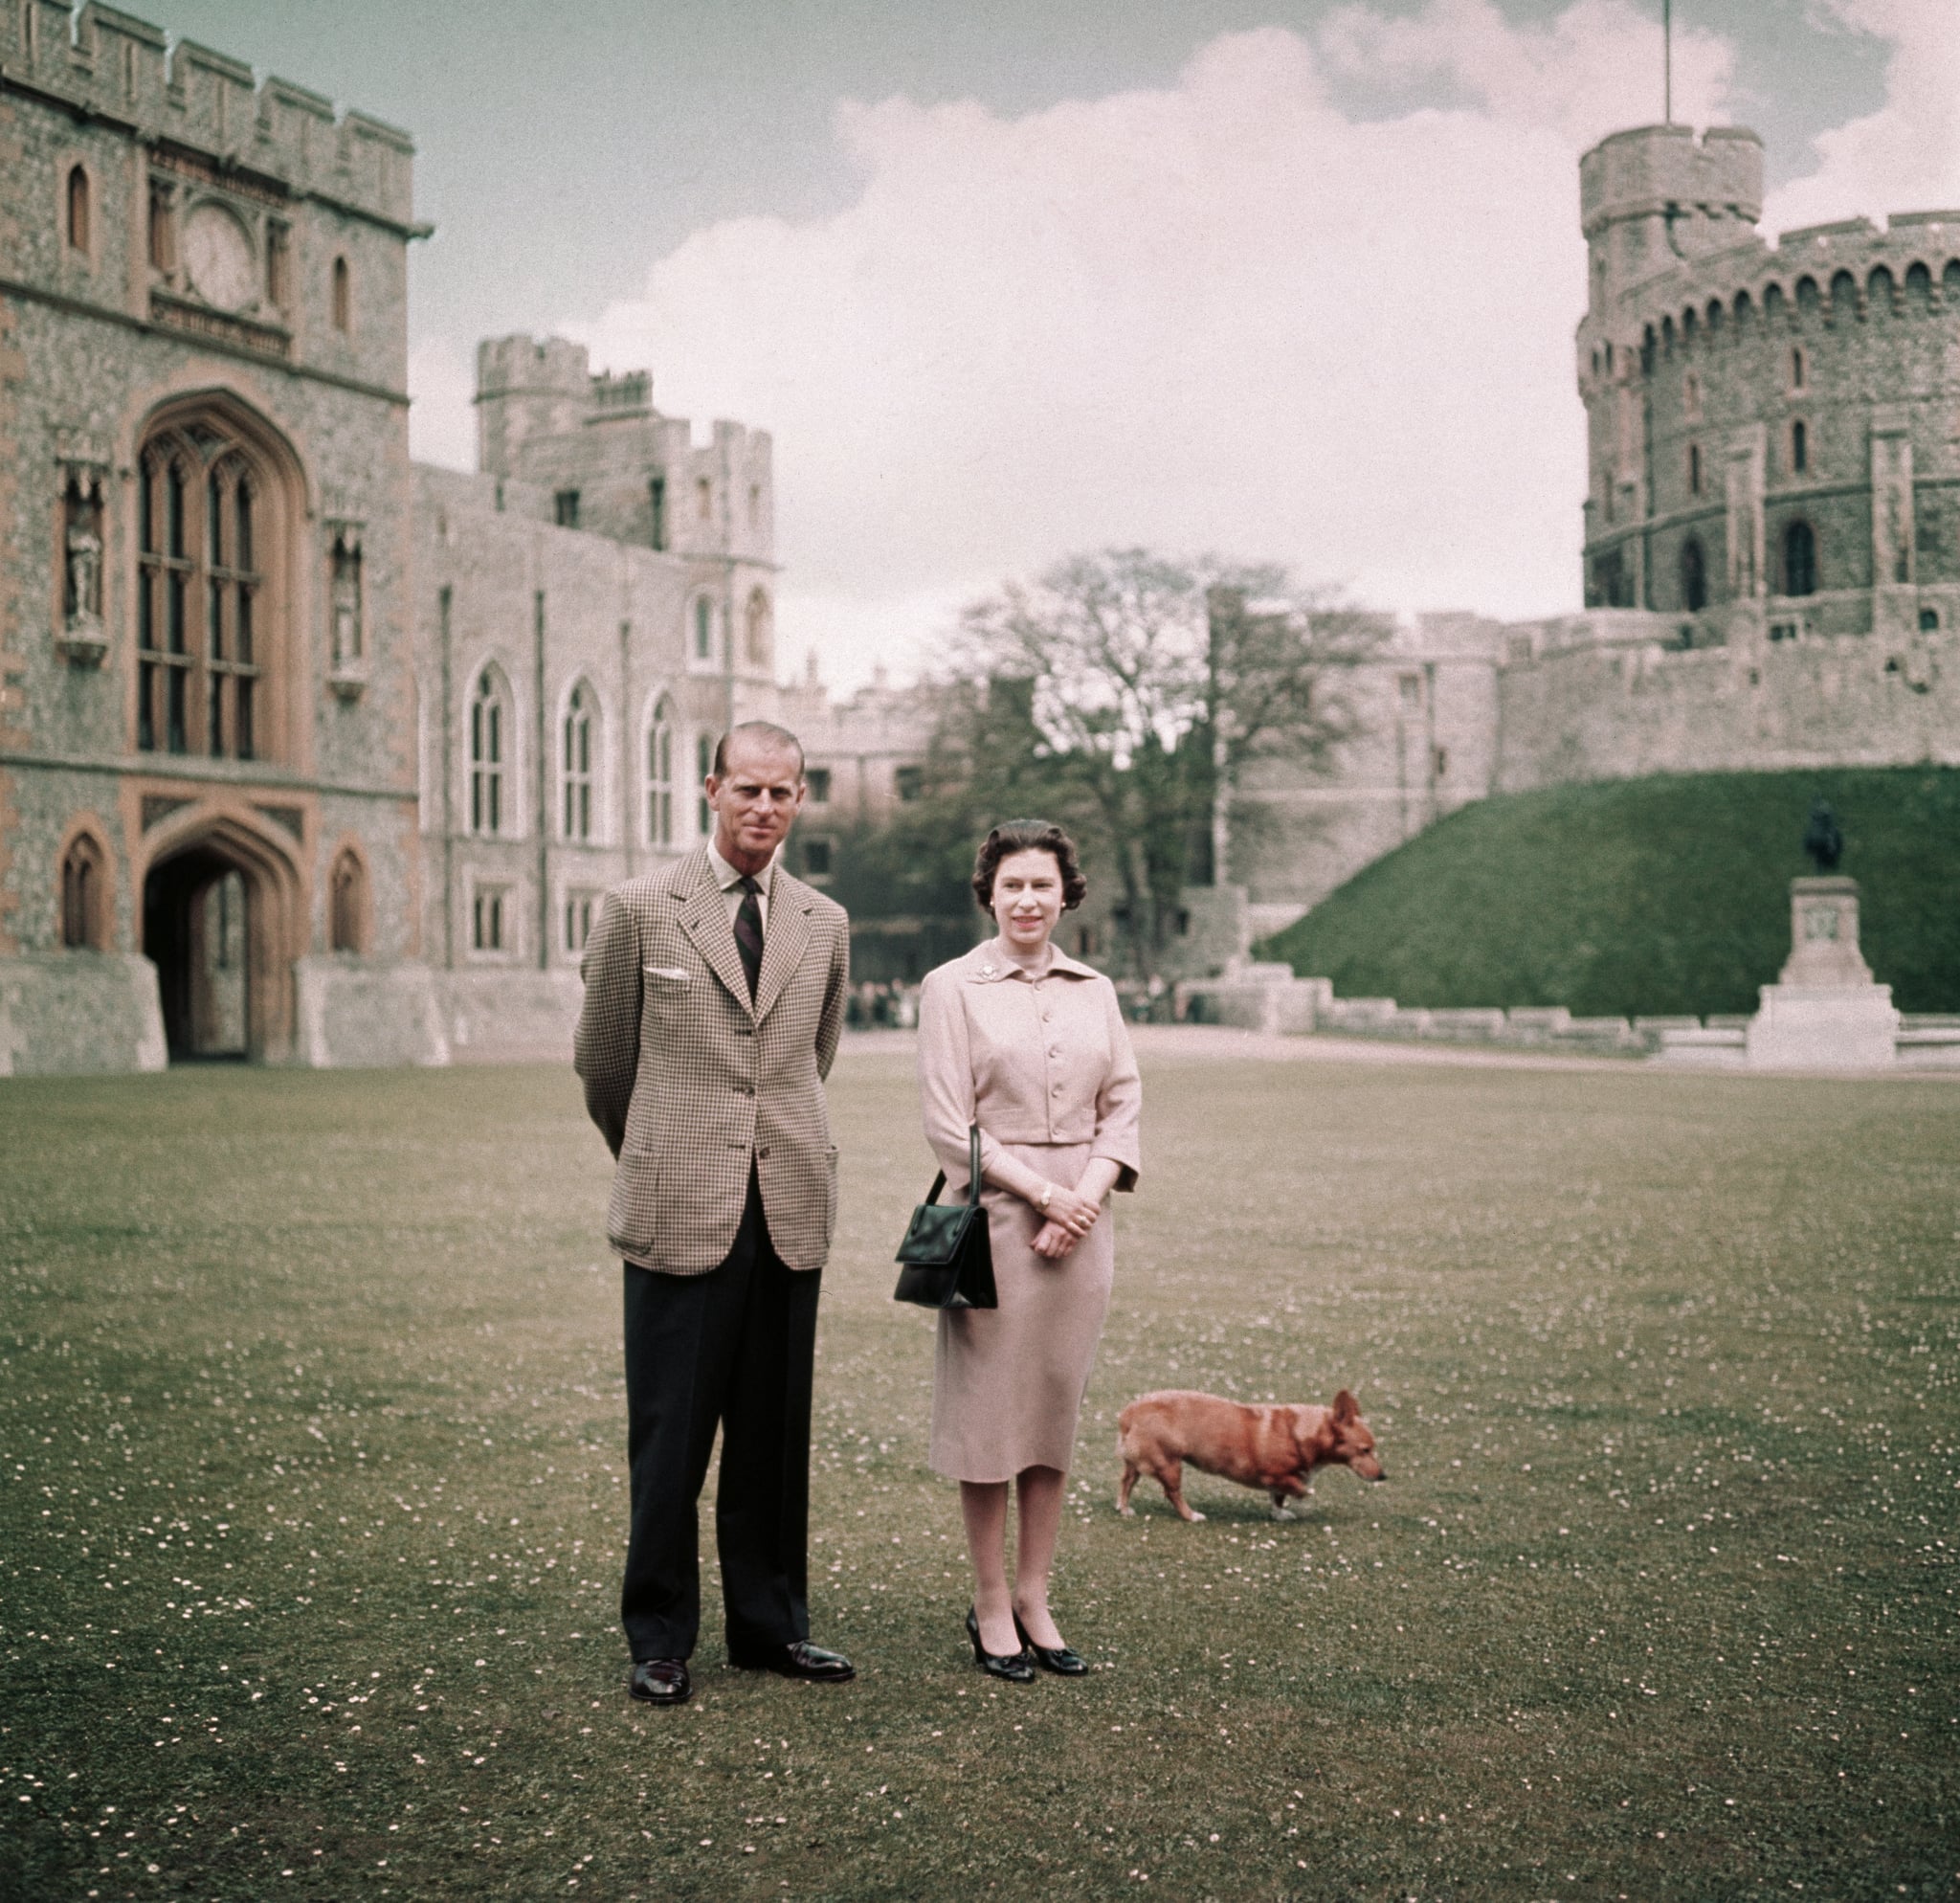 Queen Elizabeth, Prince Philip, and one of their corgis at Windsor Castle in 1959